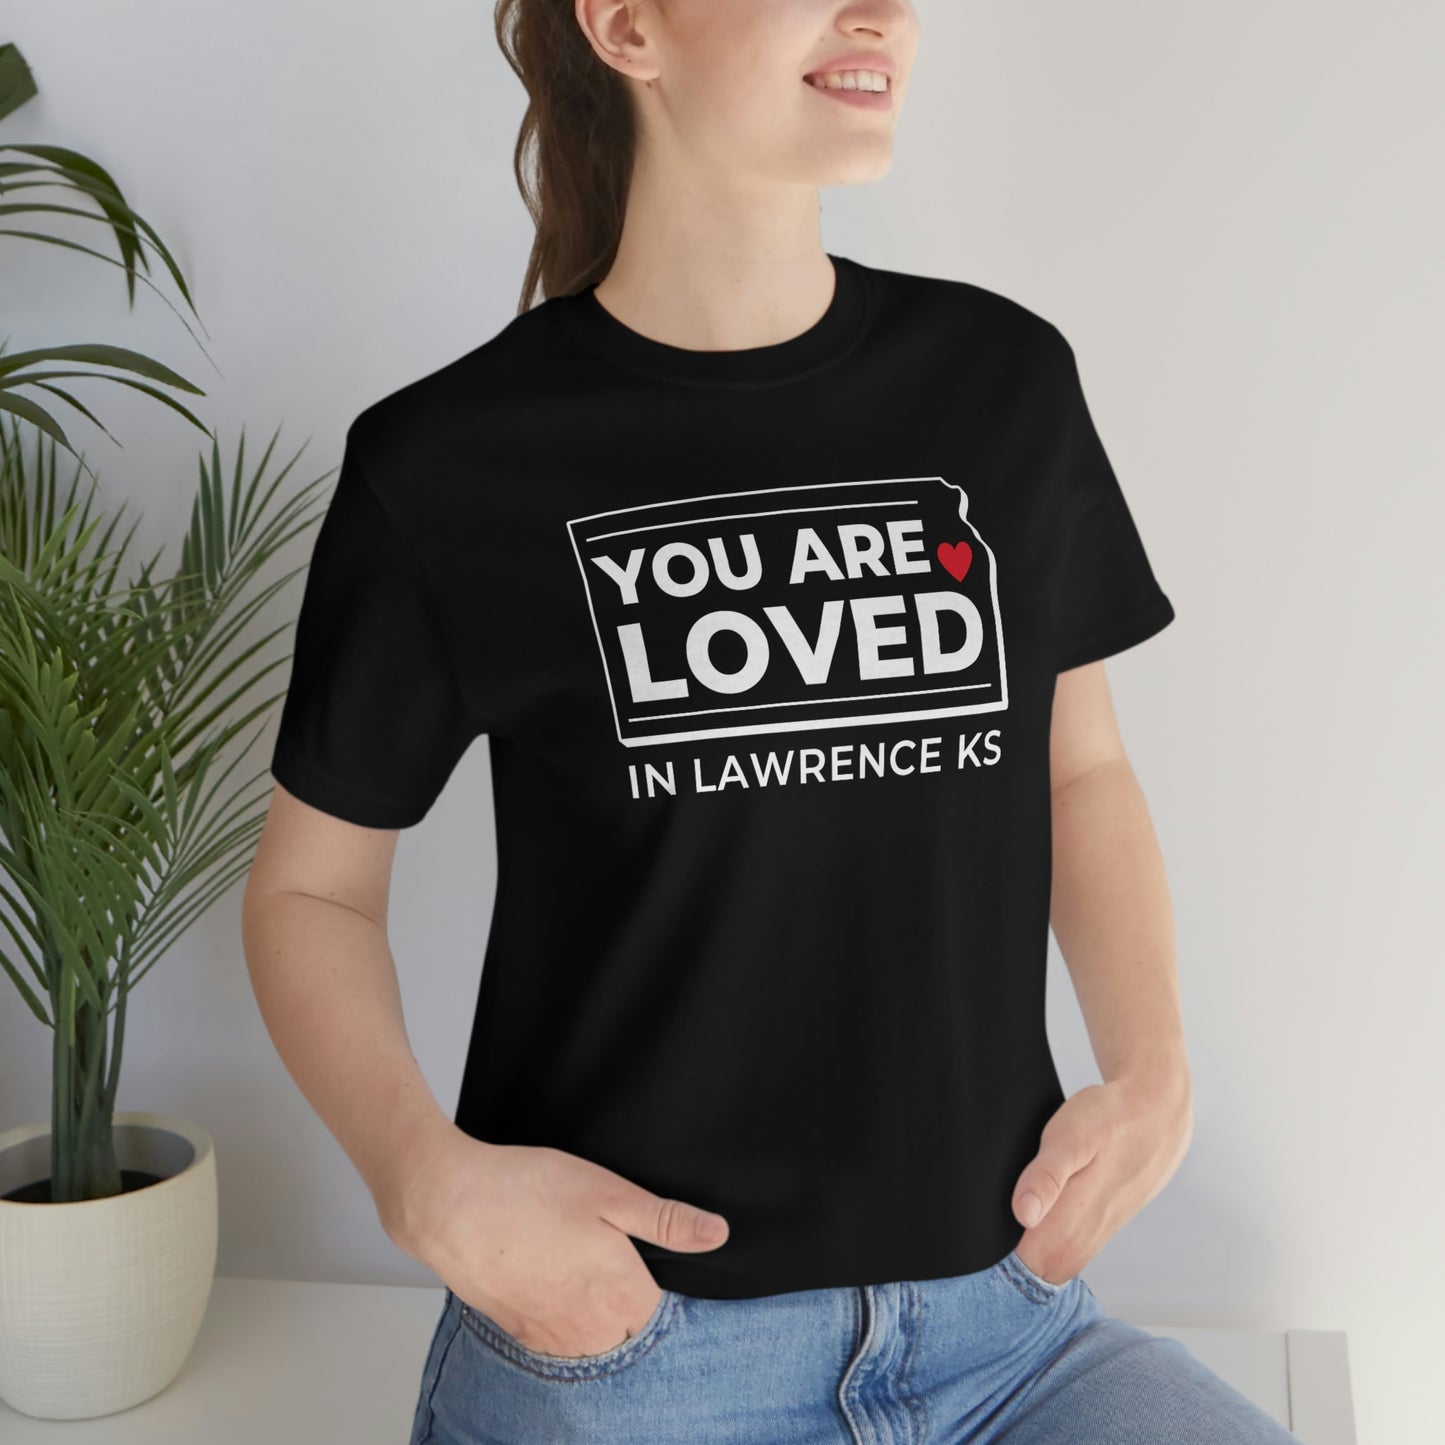 "YOU ARE LOVED ❤️ in Lawrence KS" T-Shirt [BLACK]